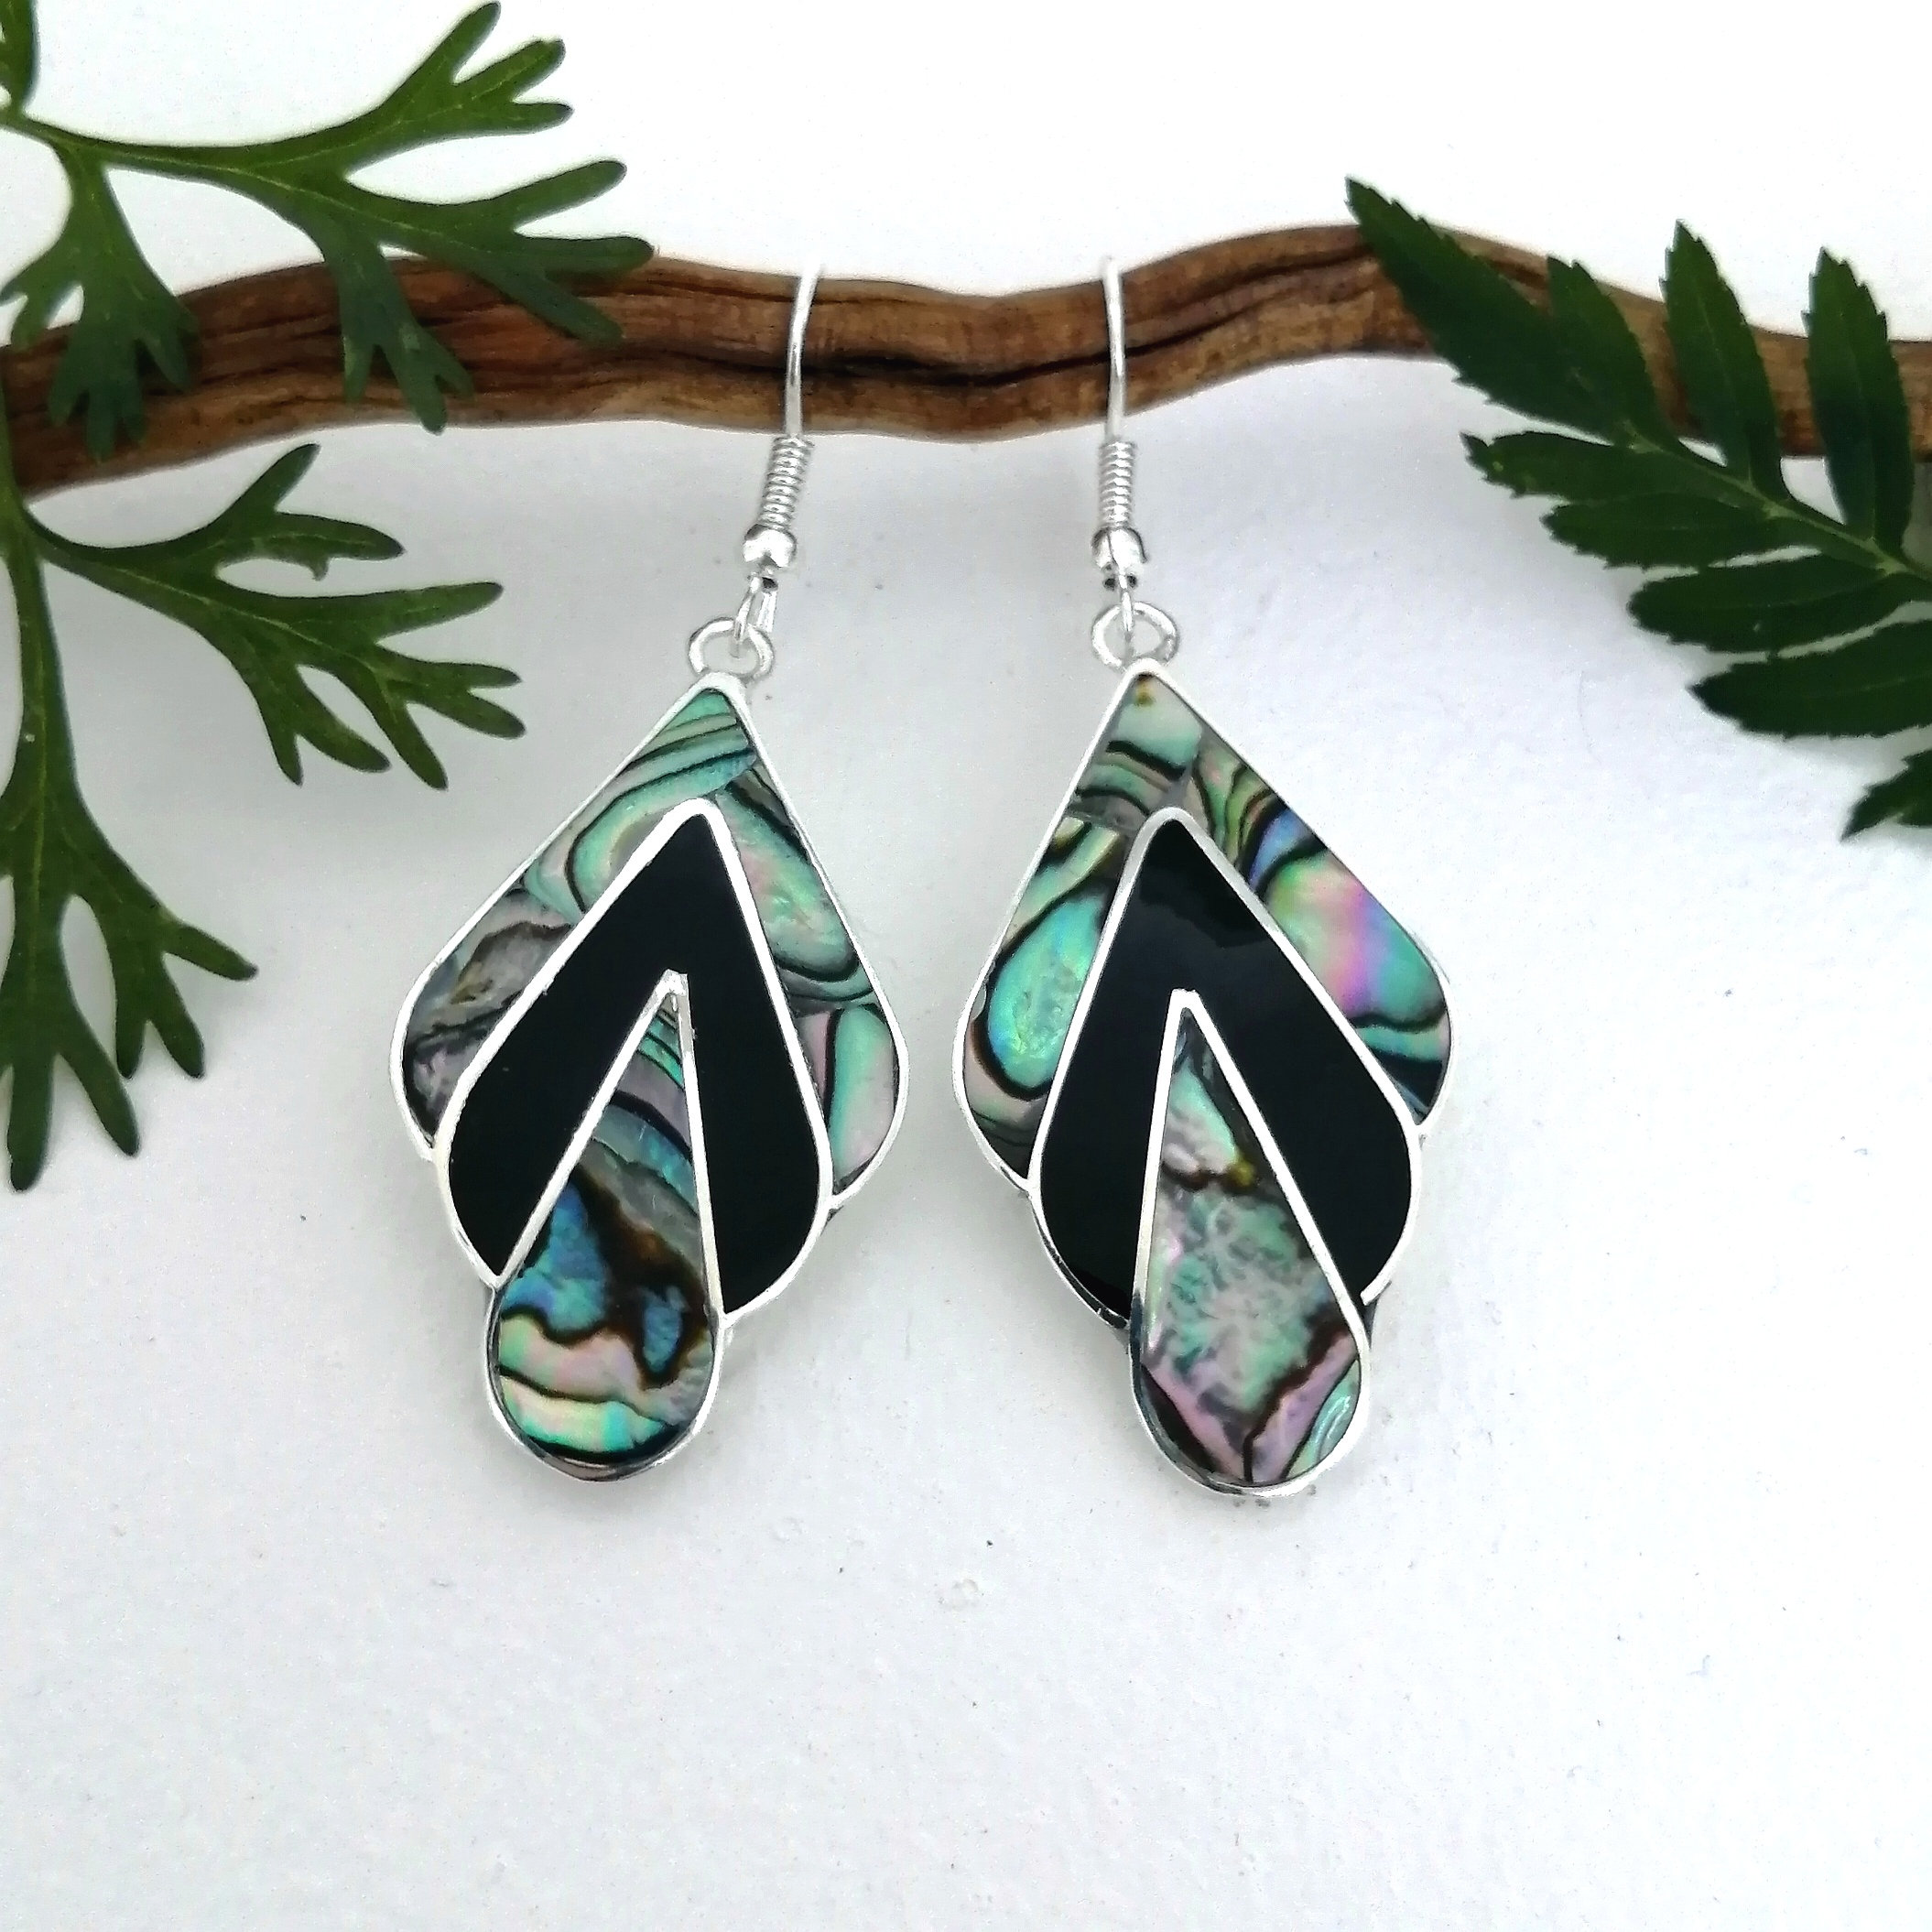 Art Deco Fan Earring Boho Chic Mexican Earrings Iridescent Abalone Abalone Earrings Handcrafted Mexican Jewellery Silver Plated